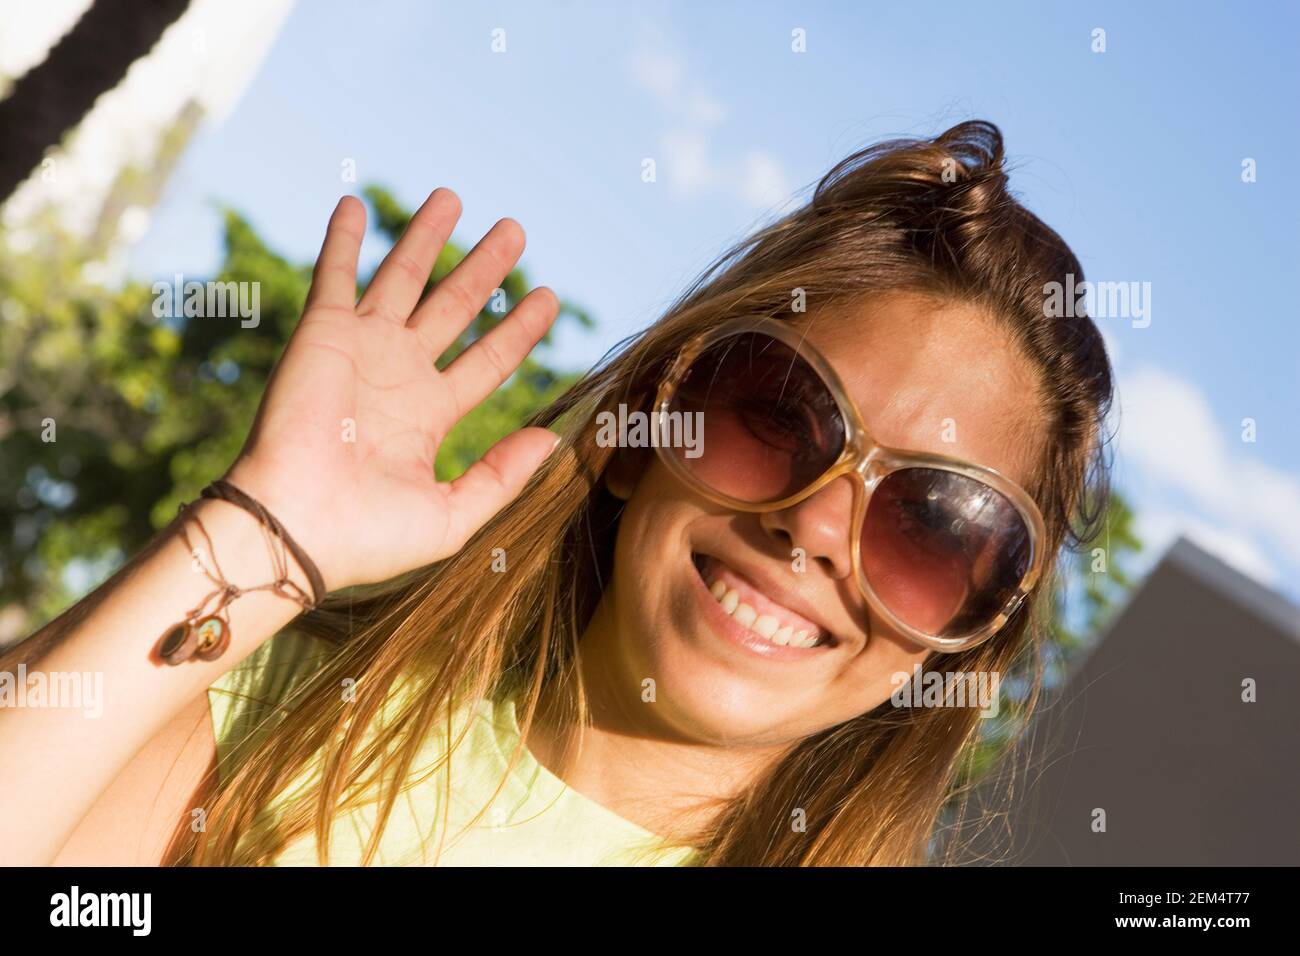 Close-up of a mid adult woman waving her hand Stock Photo